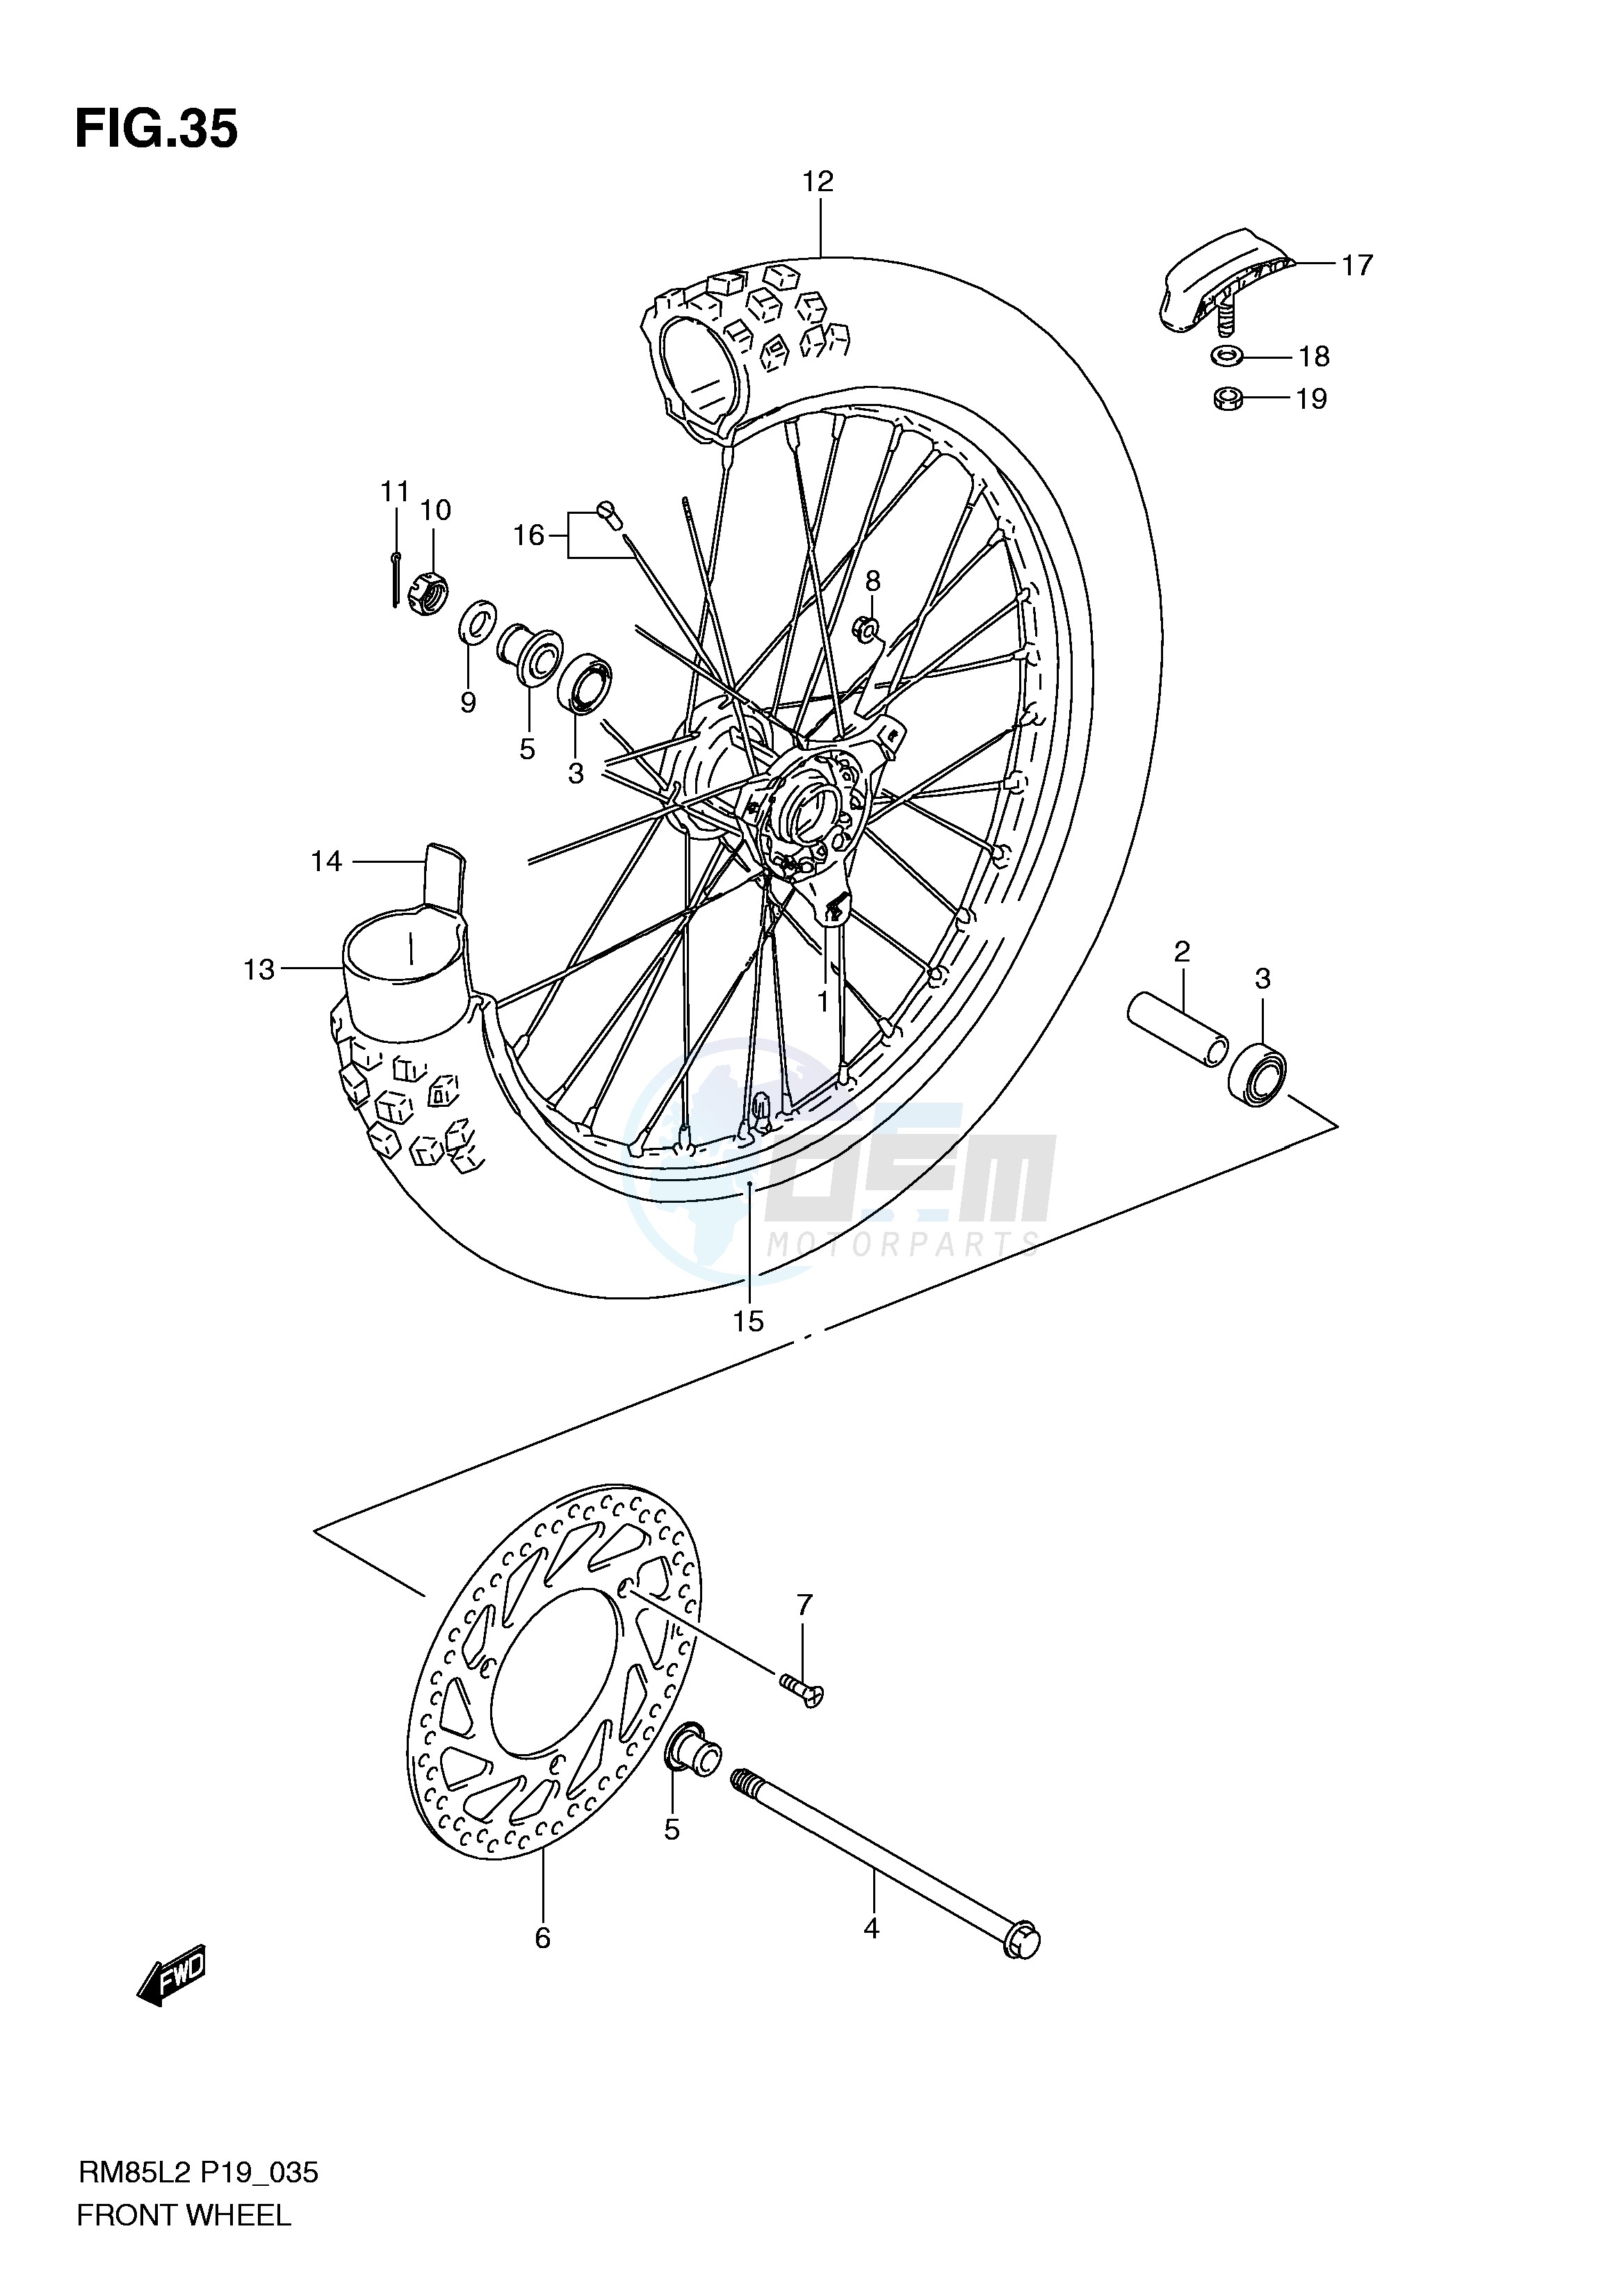 FRONT WHEEL (RM85LL2 P19) image